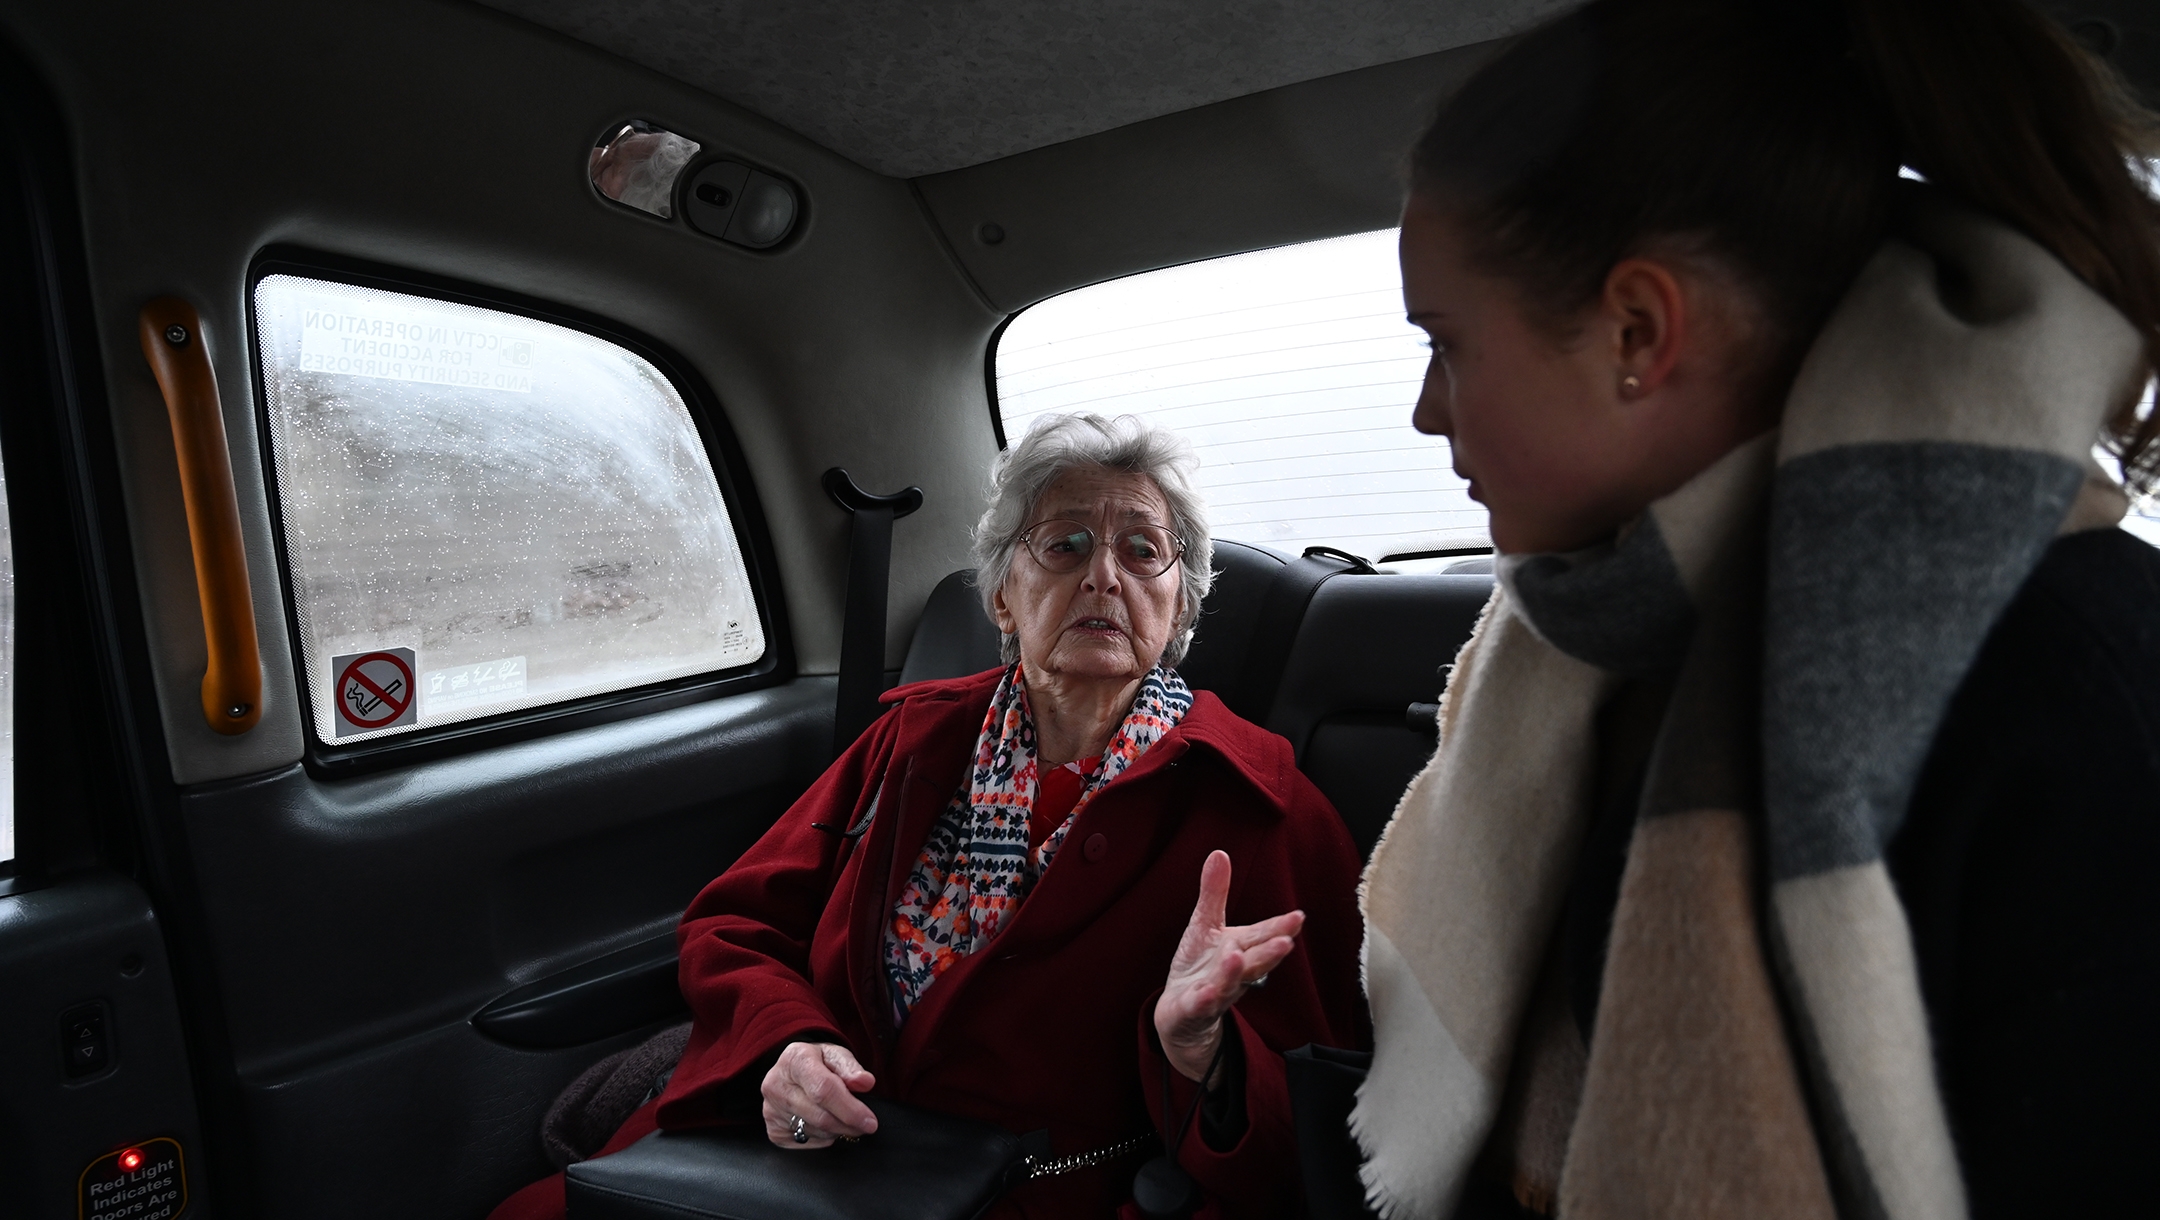 Anna Stupnicka-Bando, the 90-year-old president of the Polish Association of the Righteous Among the Nations, inside one of the From the Depths taxis for saviors of Jews in Warsaw, Poland on Jan. 29, 2020. (Cnaan Liphshiz)